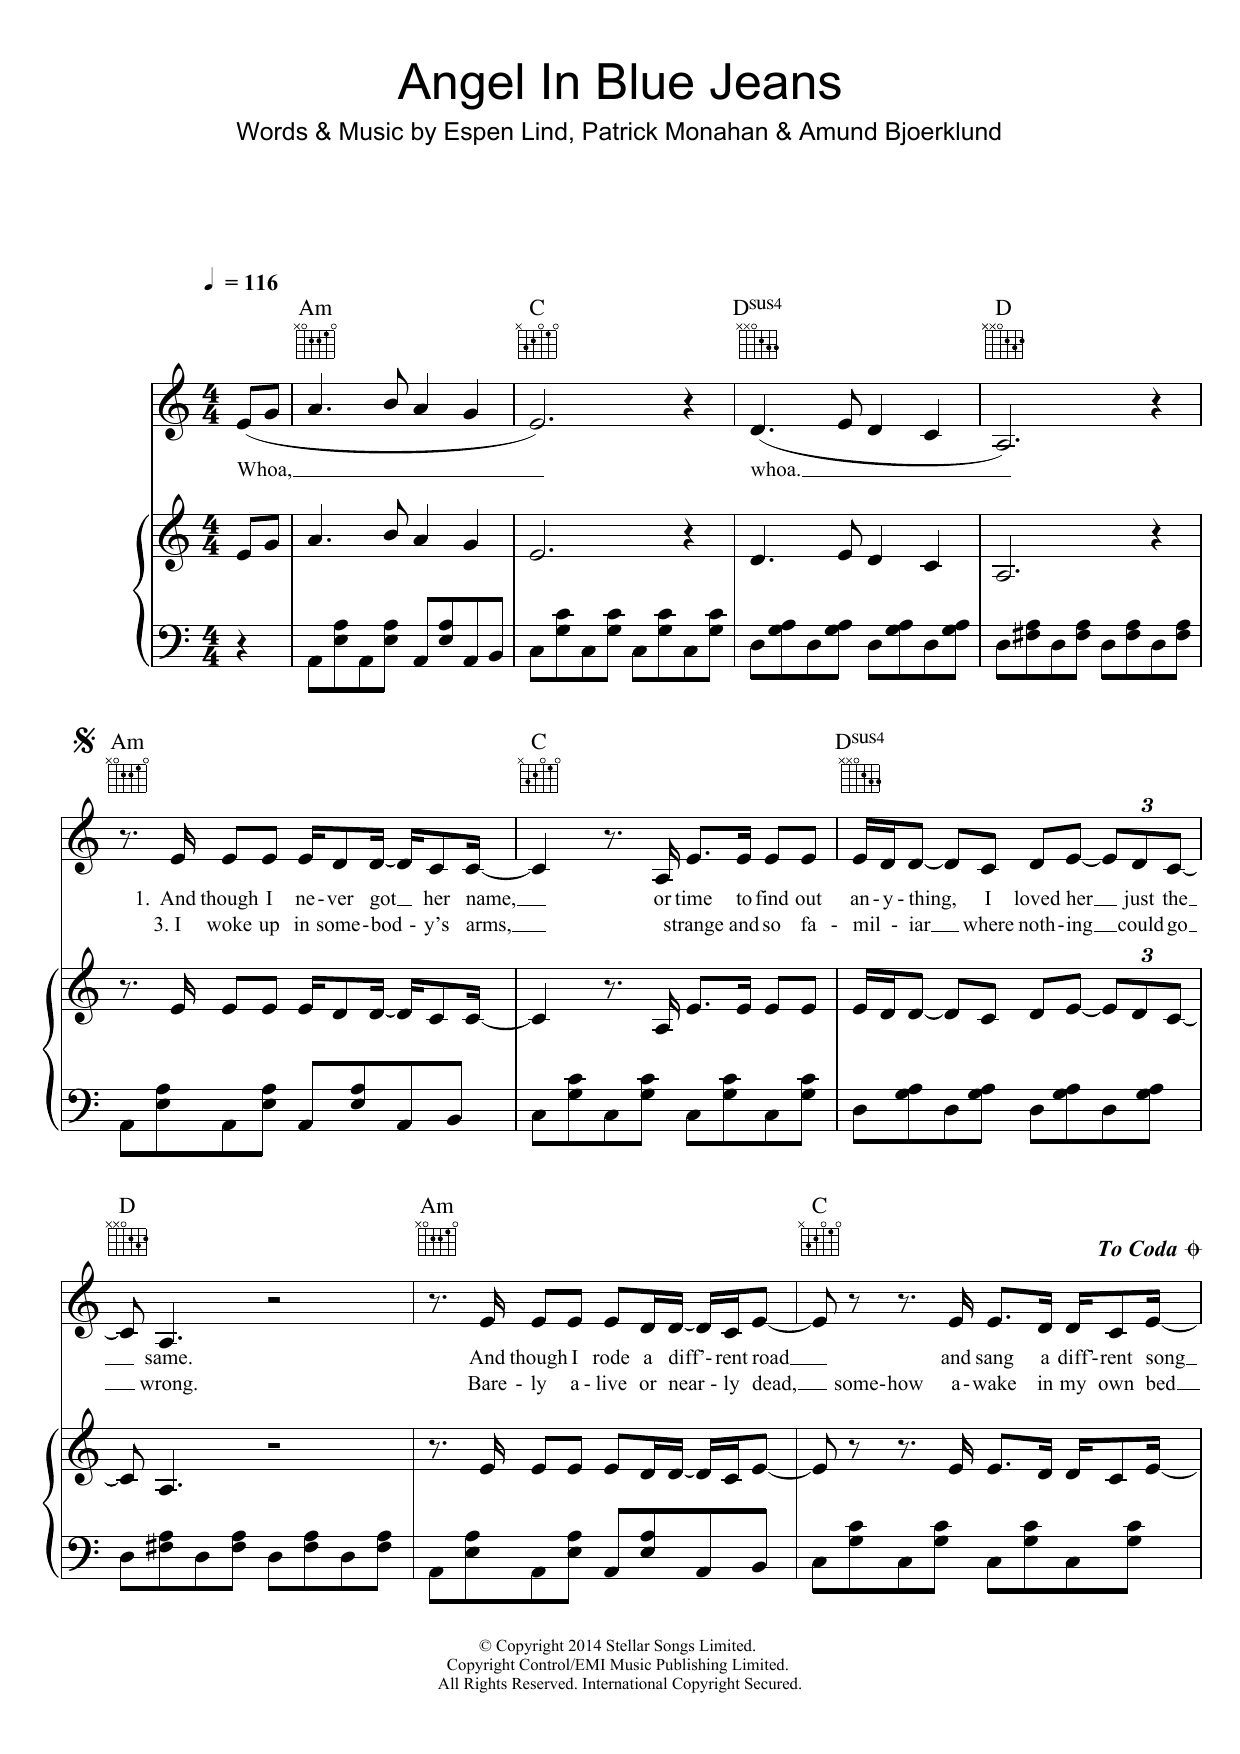 Train Angel In Blue Jeans sheet music notes printable PDF score